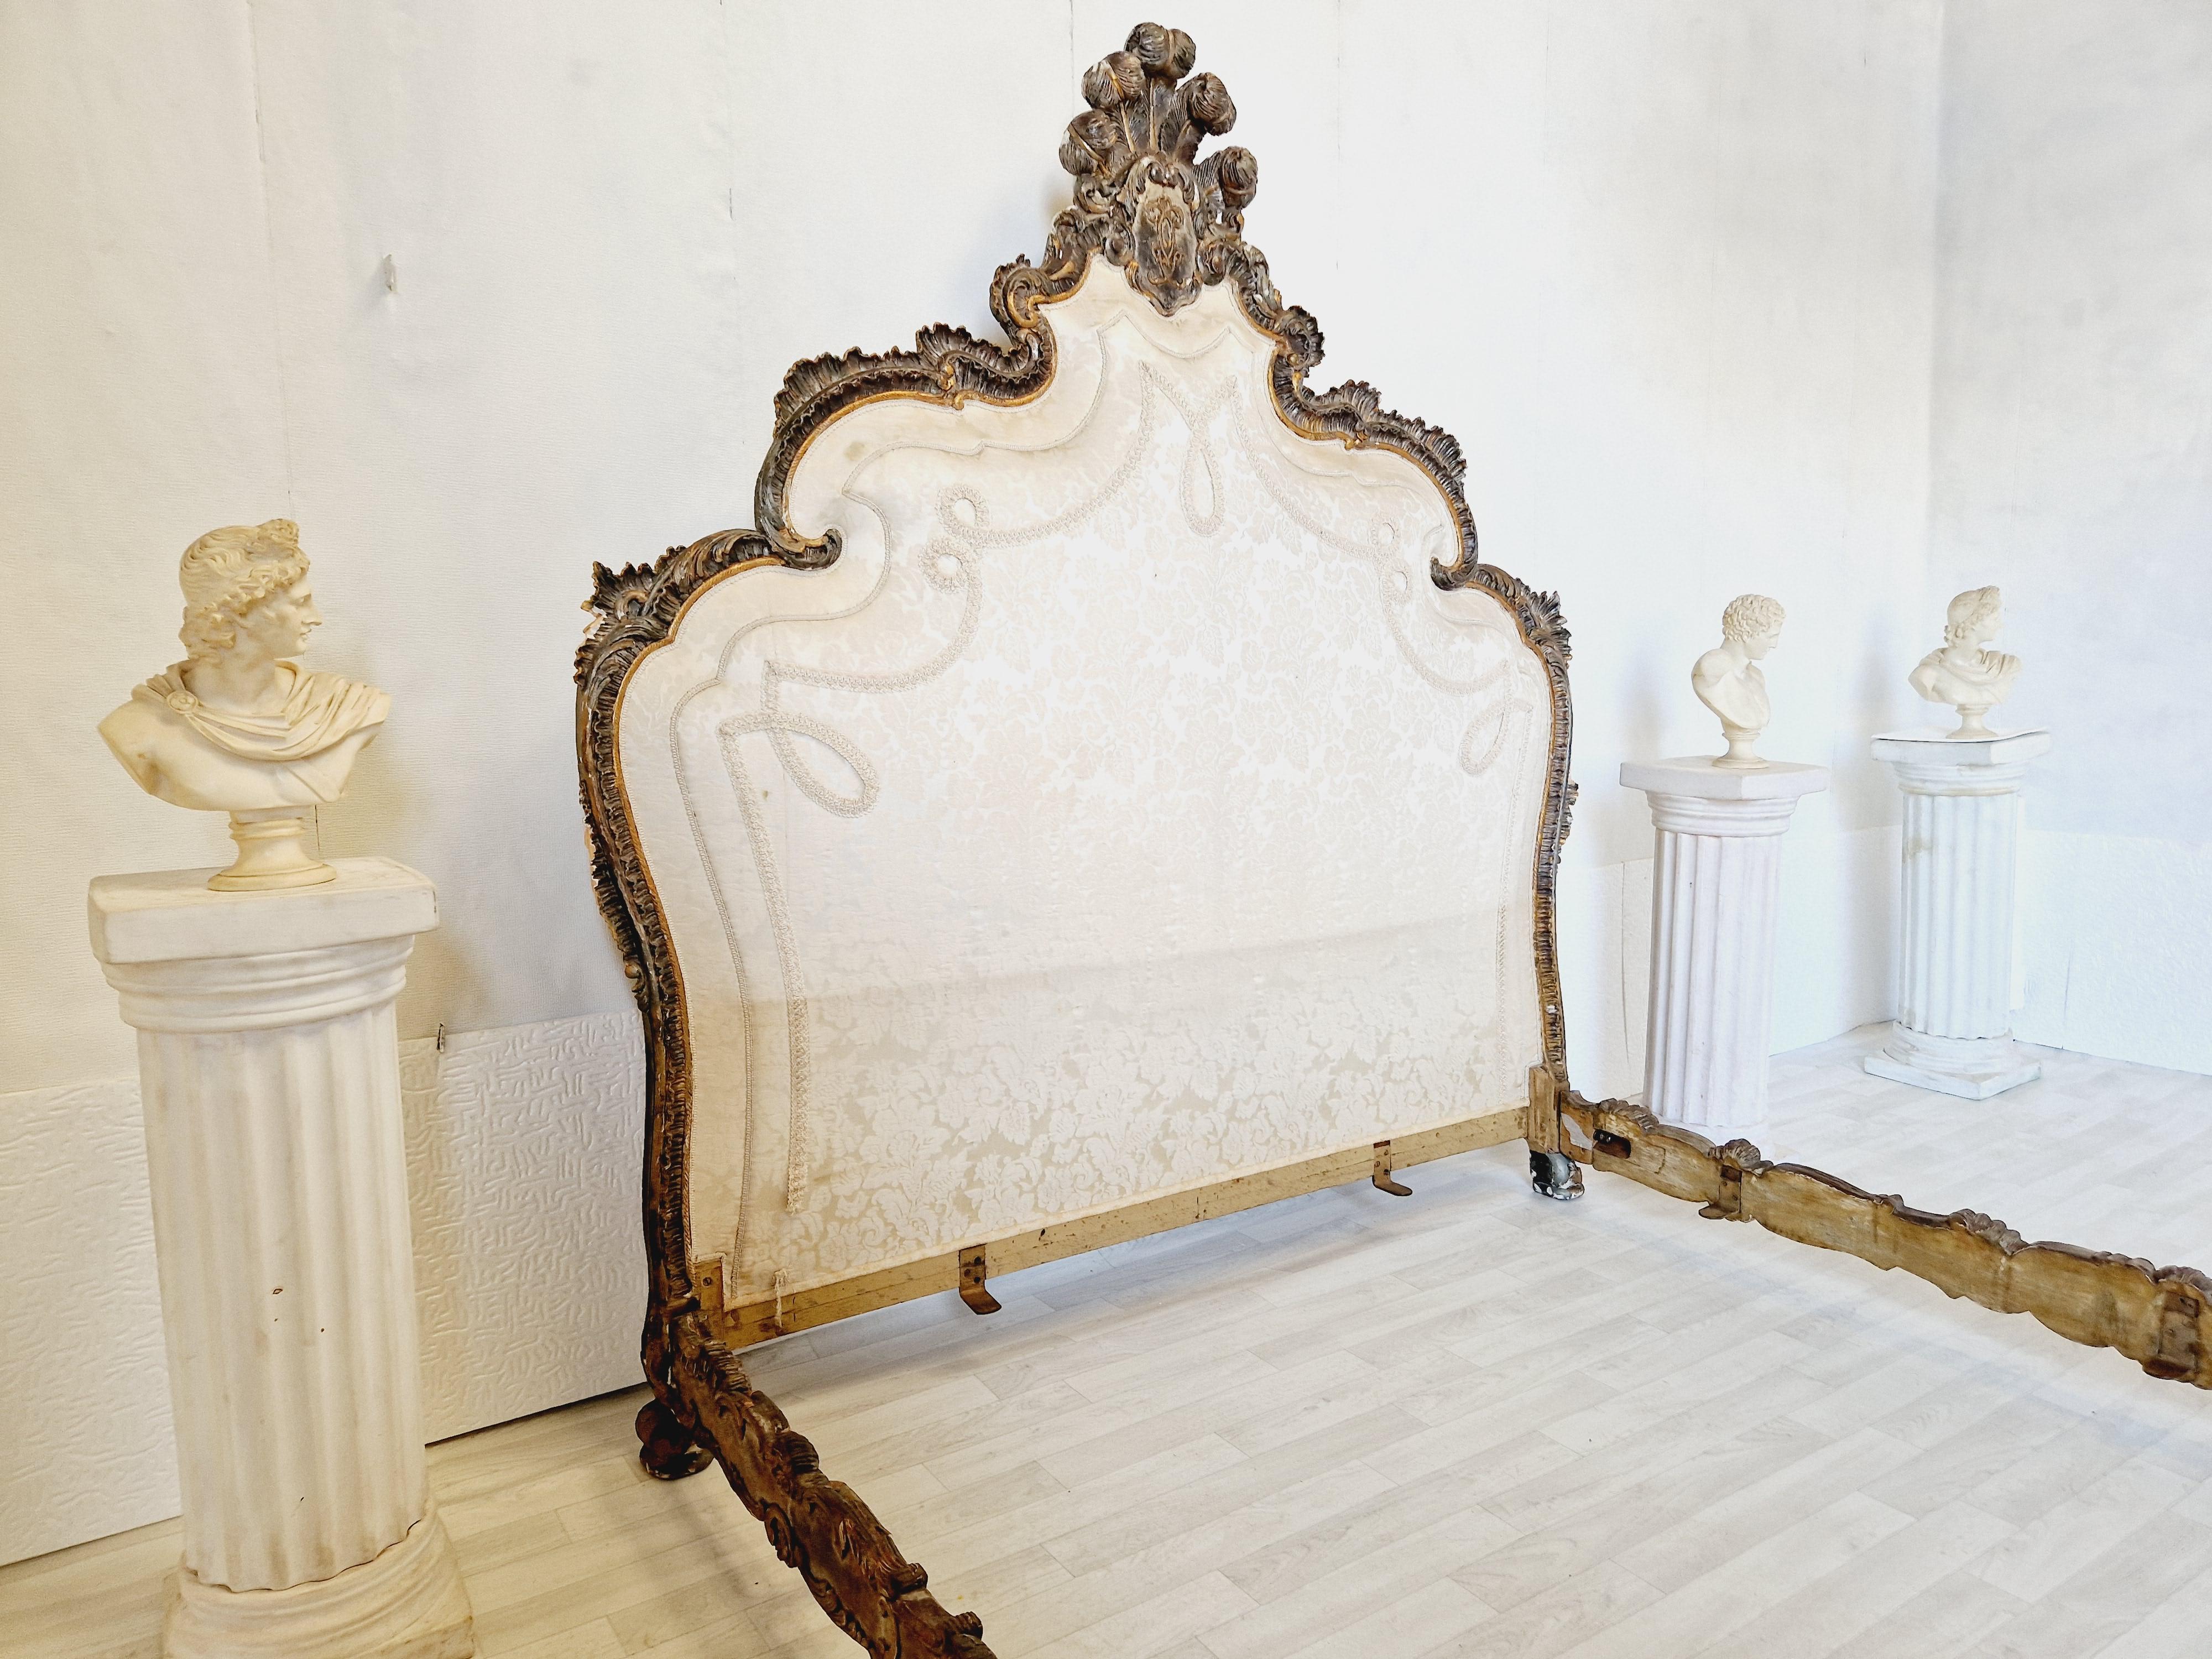 
Introducing a rare and exquisite 19th century Venetian bed of king size from Italy. This beautifully crafted bed is made of gilded wood material with intricate carvings, which adds character and elegance to any bedroom. It comes in a rectangular